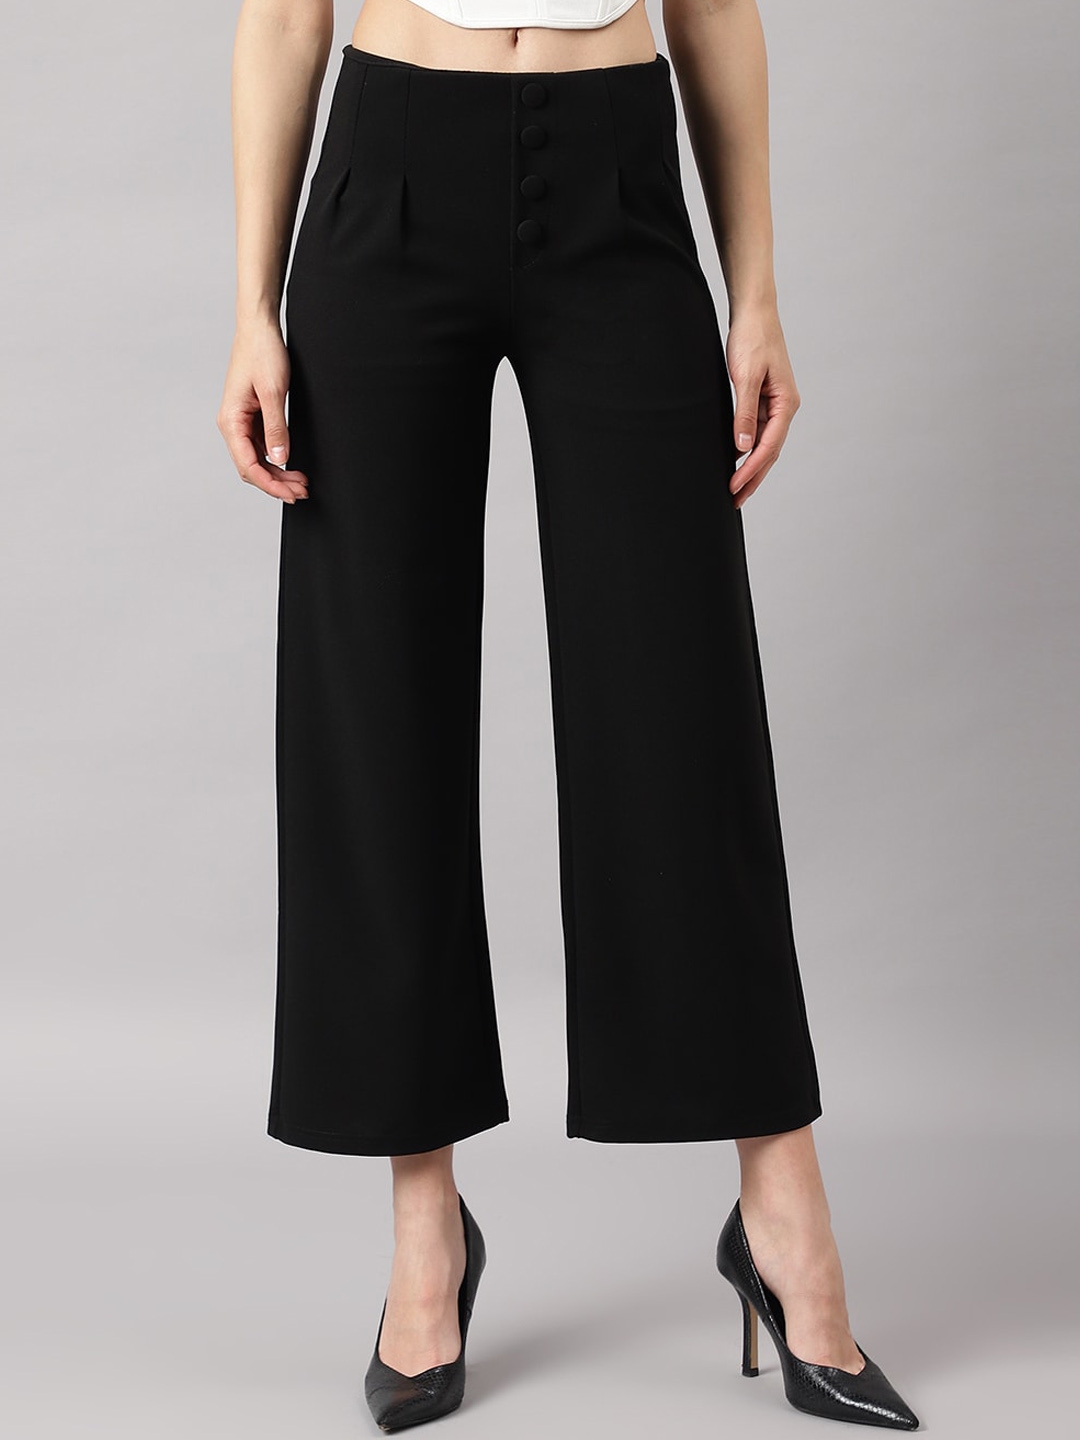 Buy DUDITI Women Acrylic Relaxed Flared High Rise Parallel Trousers ...